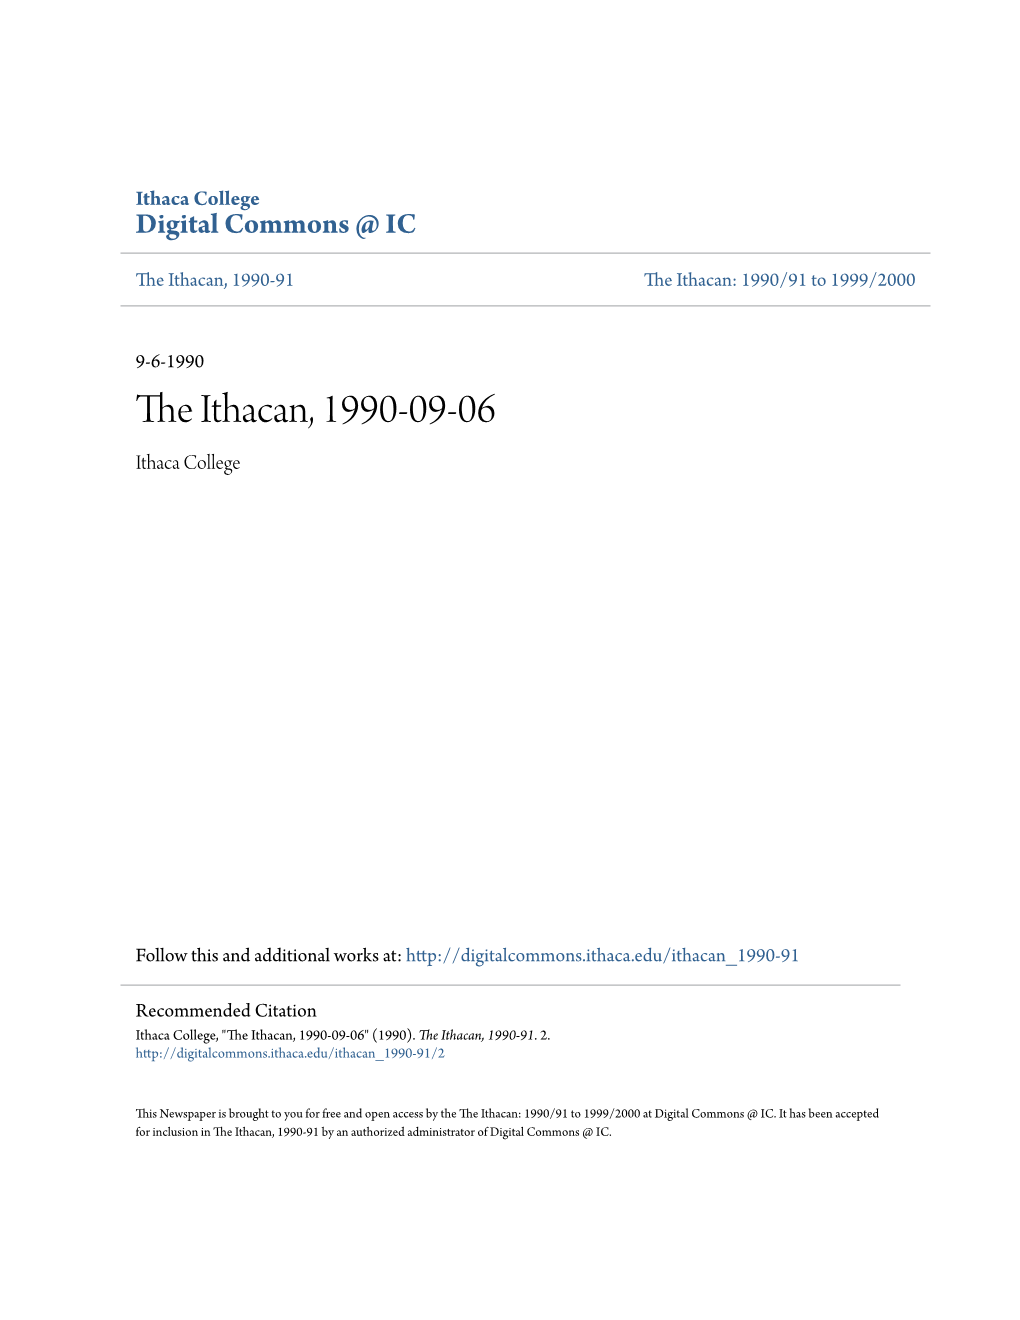 The Ithacan, 1990-09-06